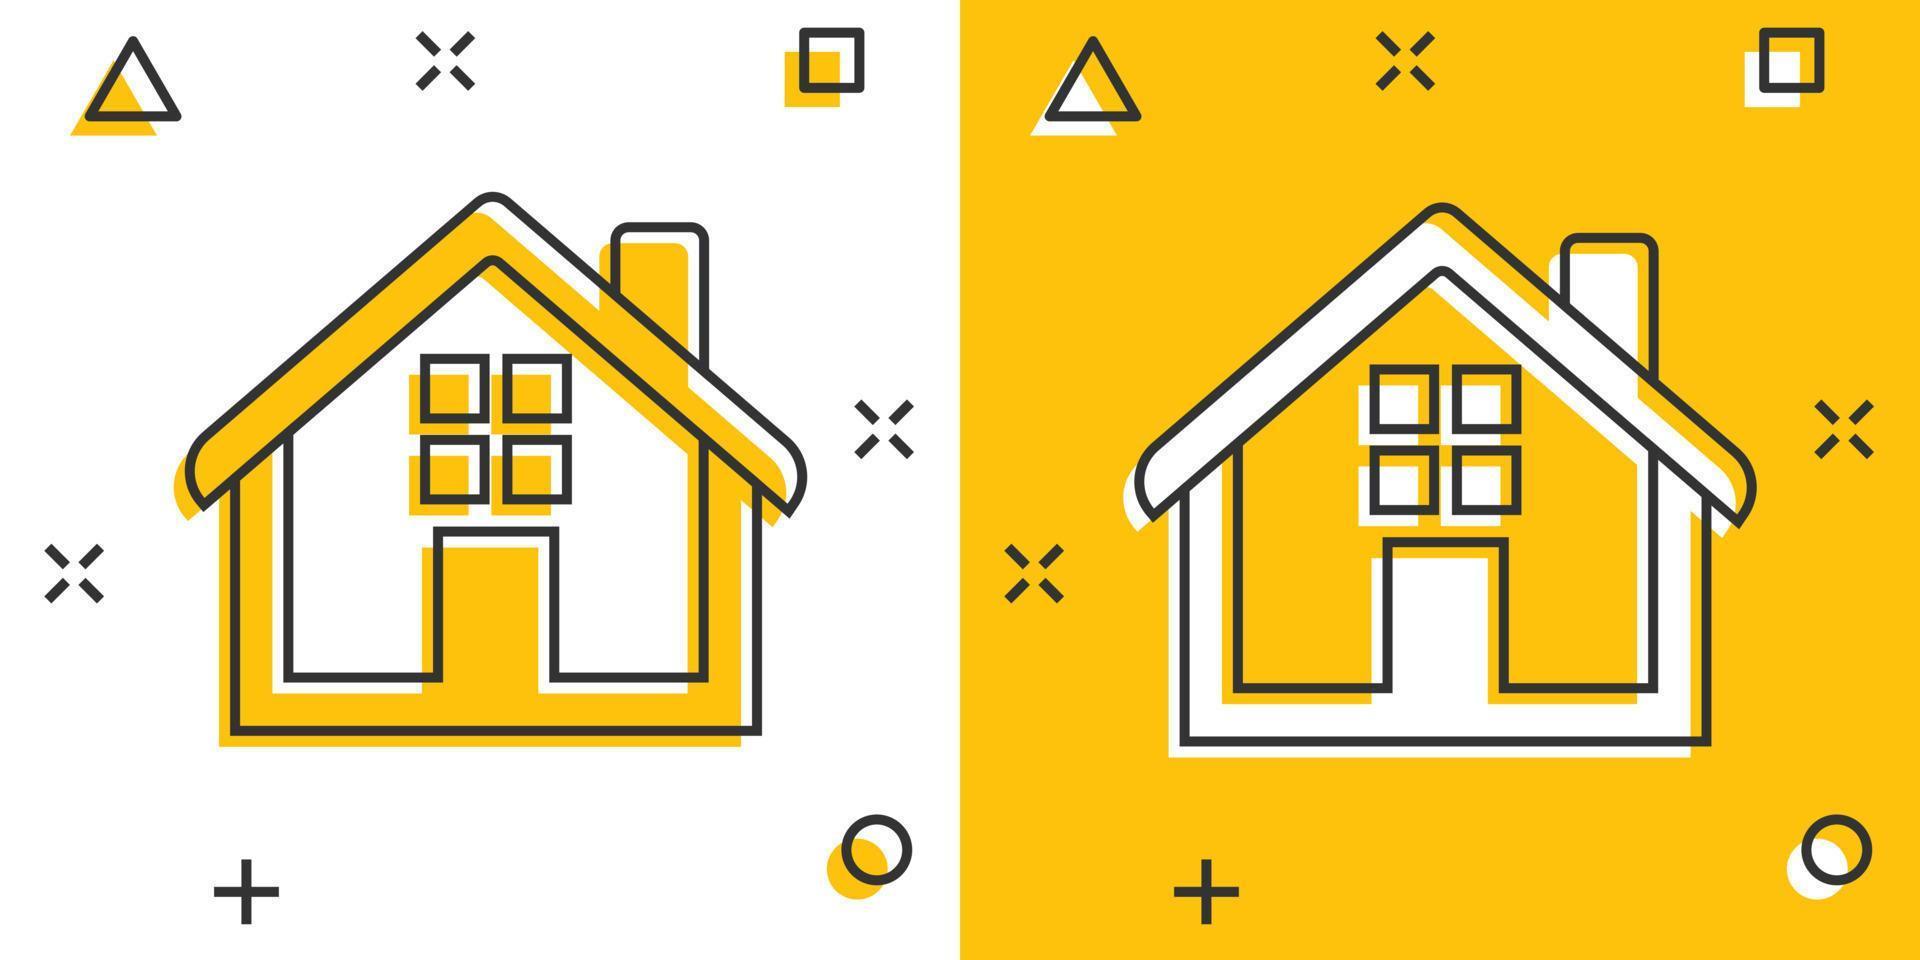 Cartoon house icon in comic style. Home illustration pictogram. House splash business concept. vector